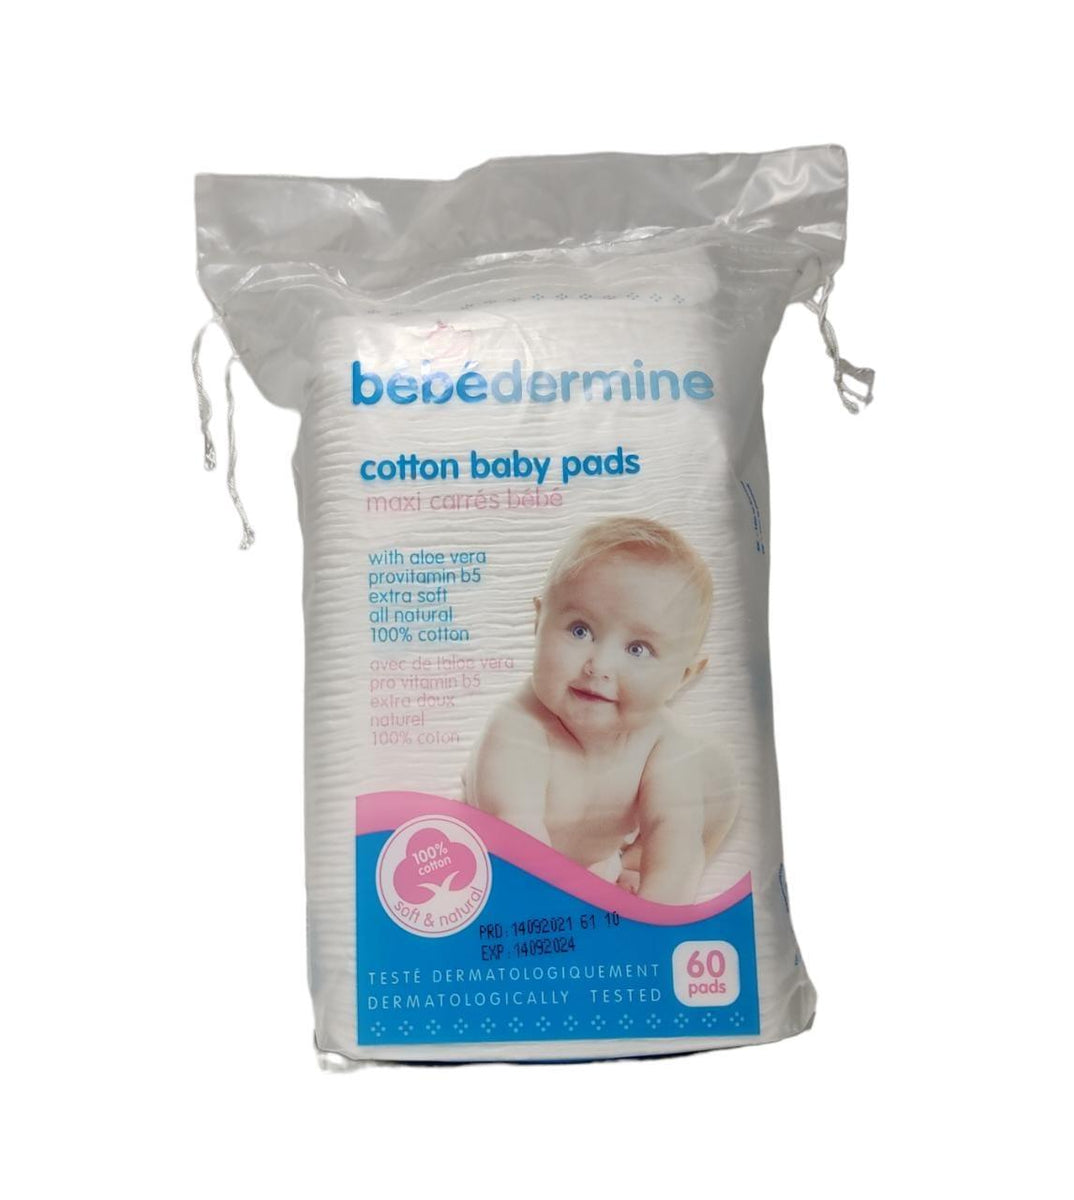 Buy Bebedermine Cotton Baby Pads online - Free delivery available